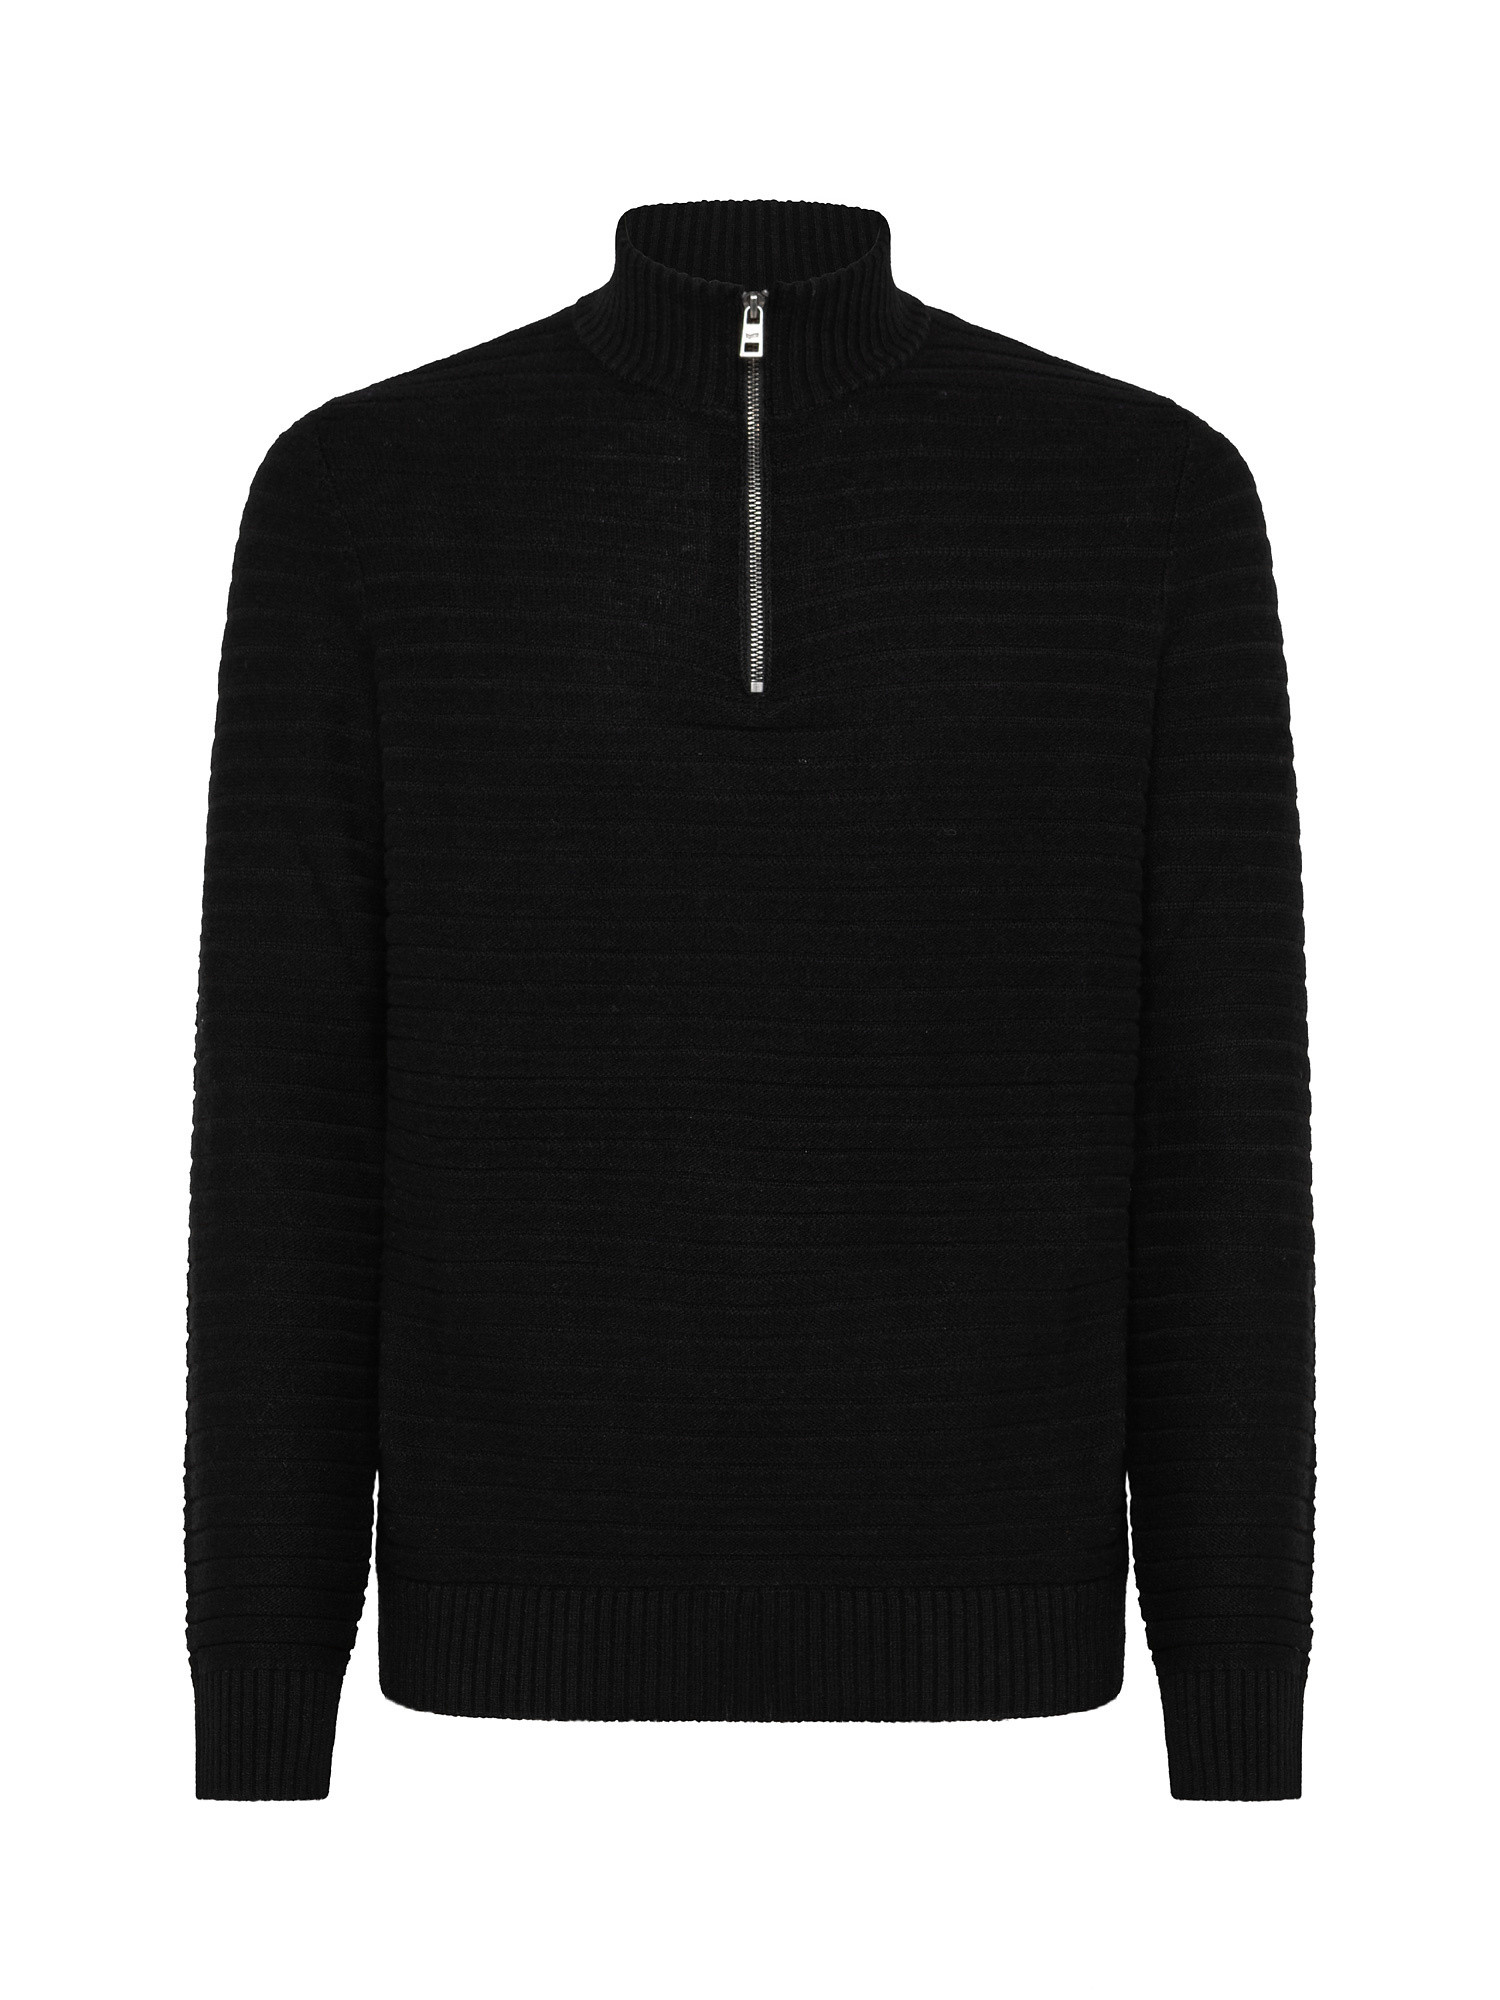 Turtleneck sweater with patches, Black, large image number 0